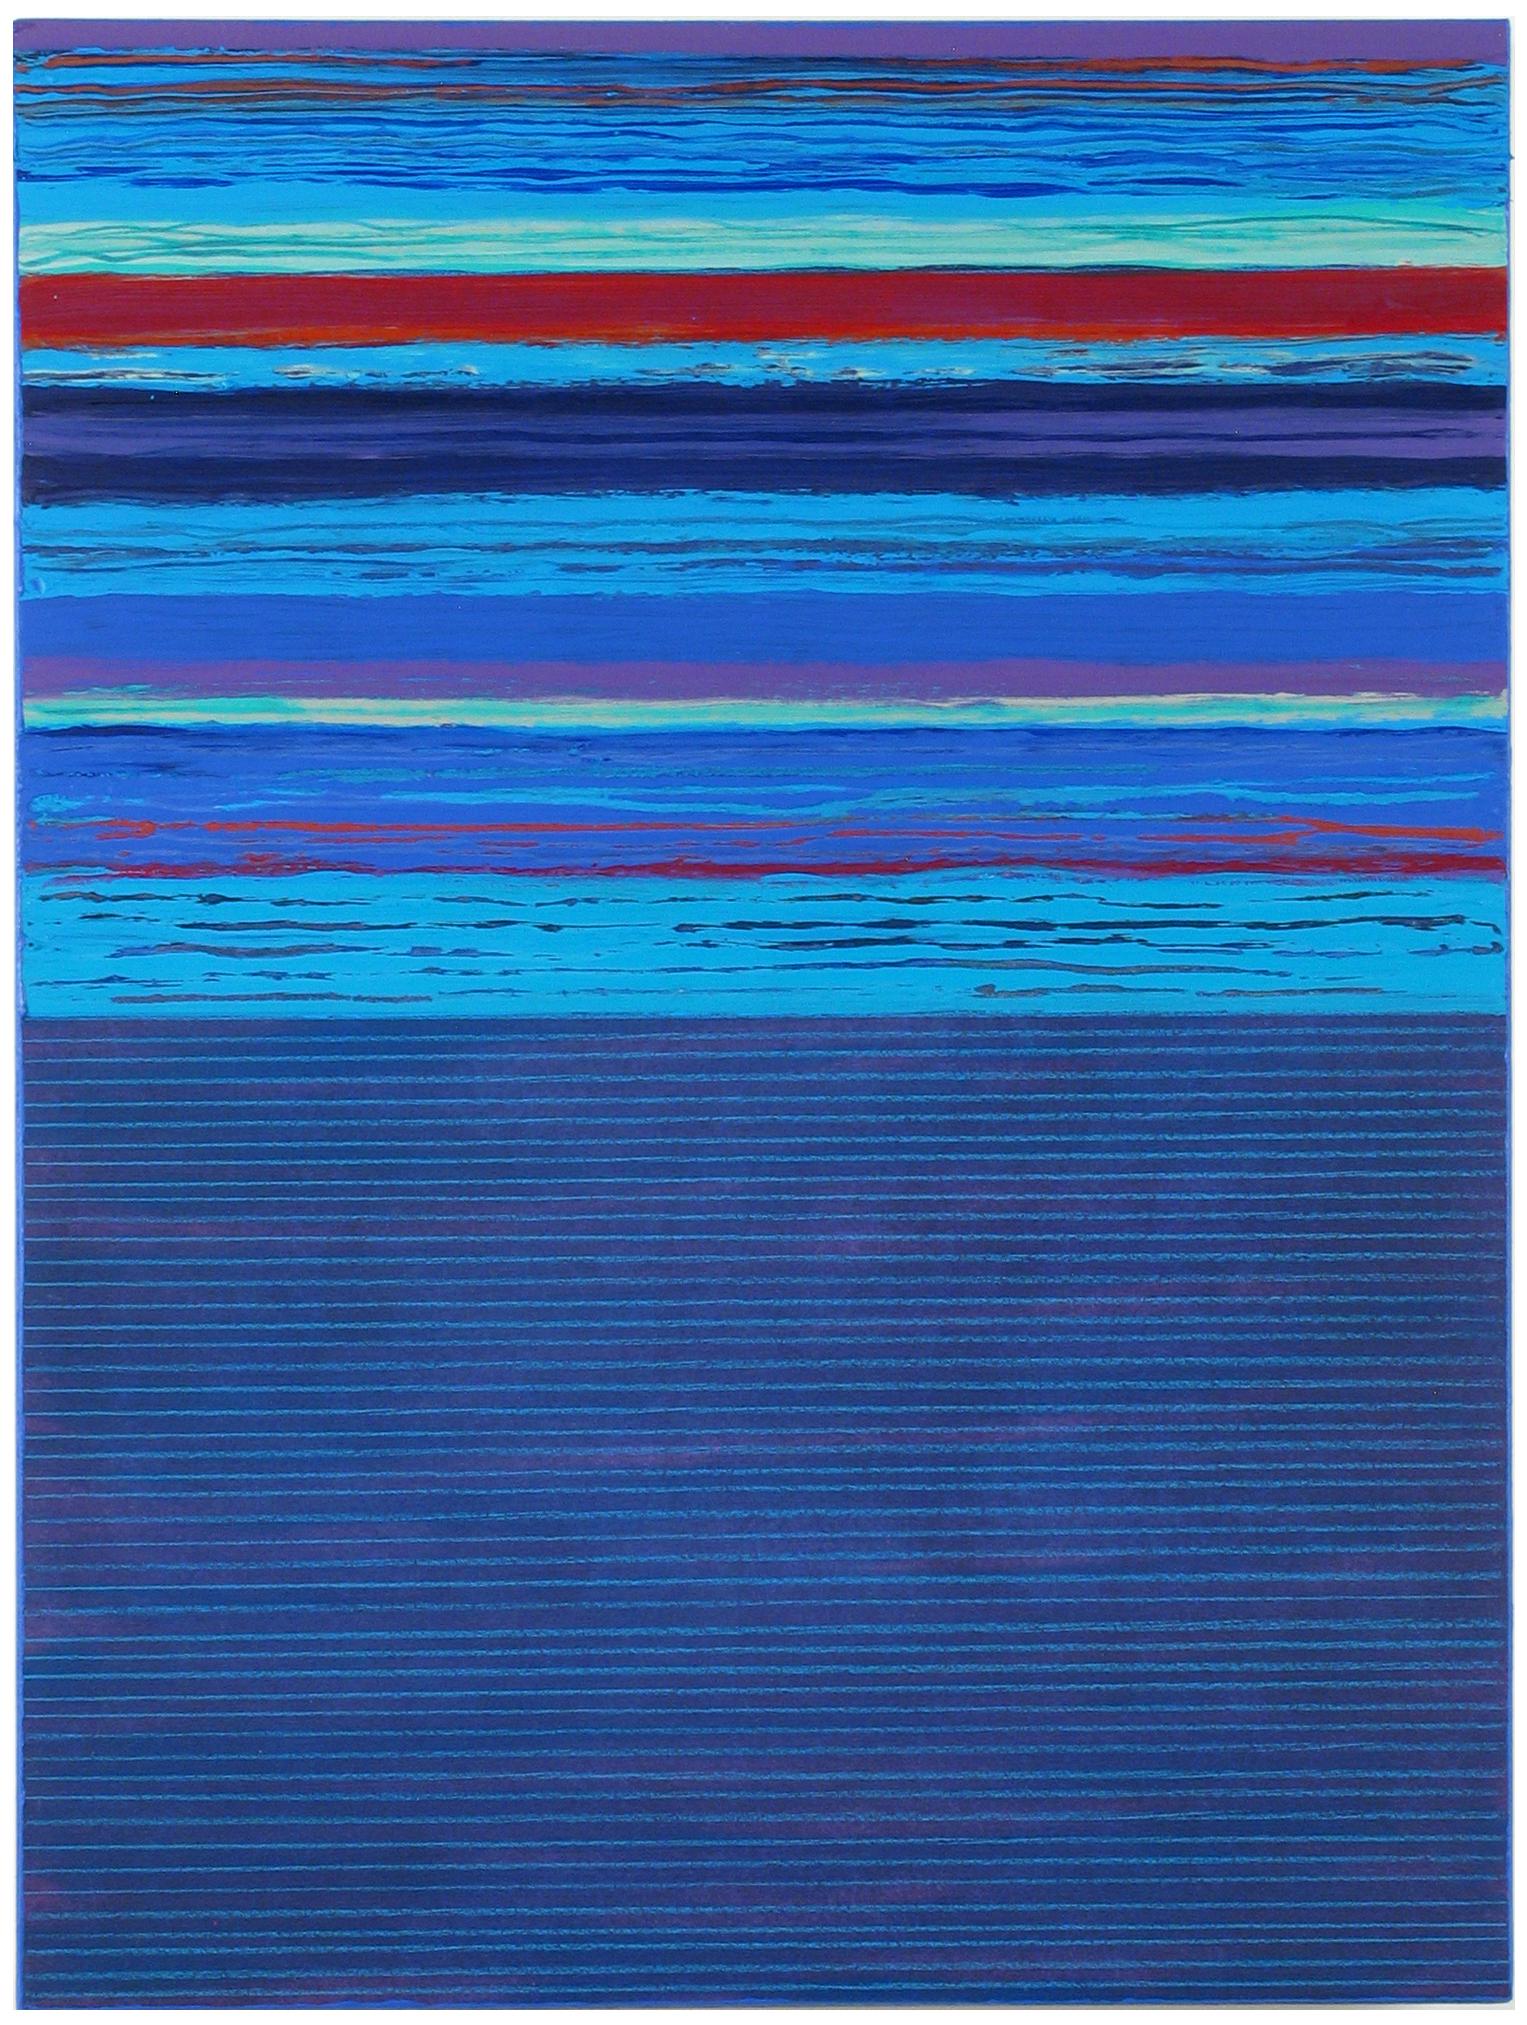 Tutto Three, Cobalt Blue, Burgundy Red, Mint Green, Teal Stripes Mixed Media